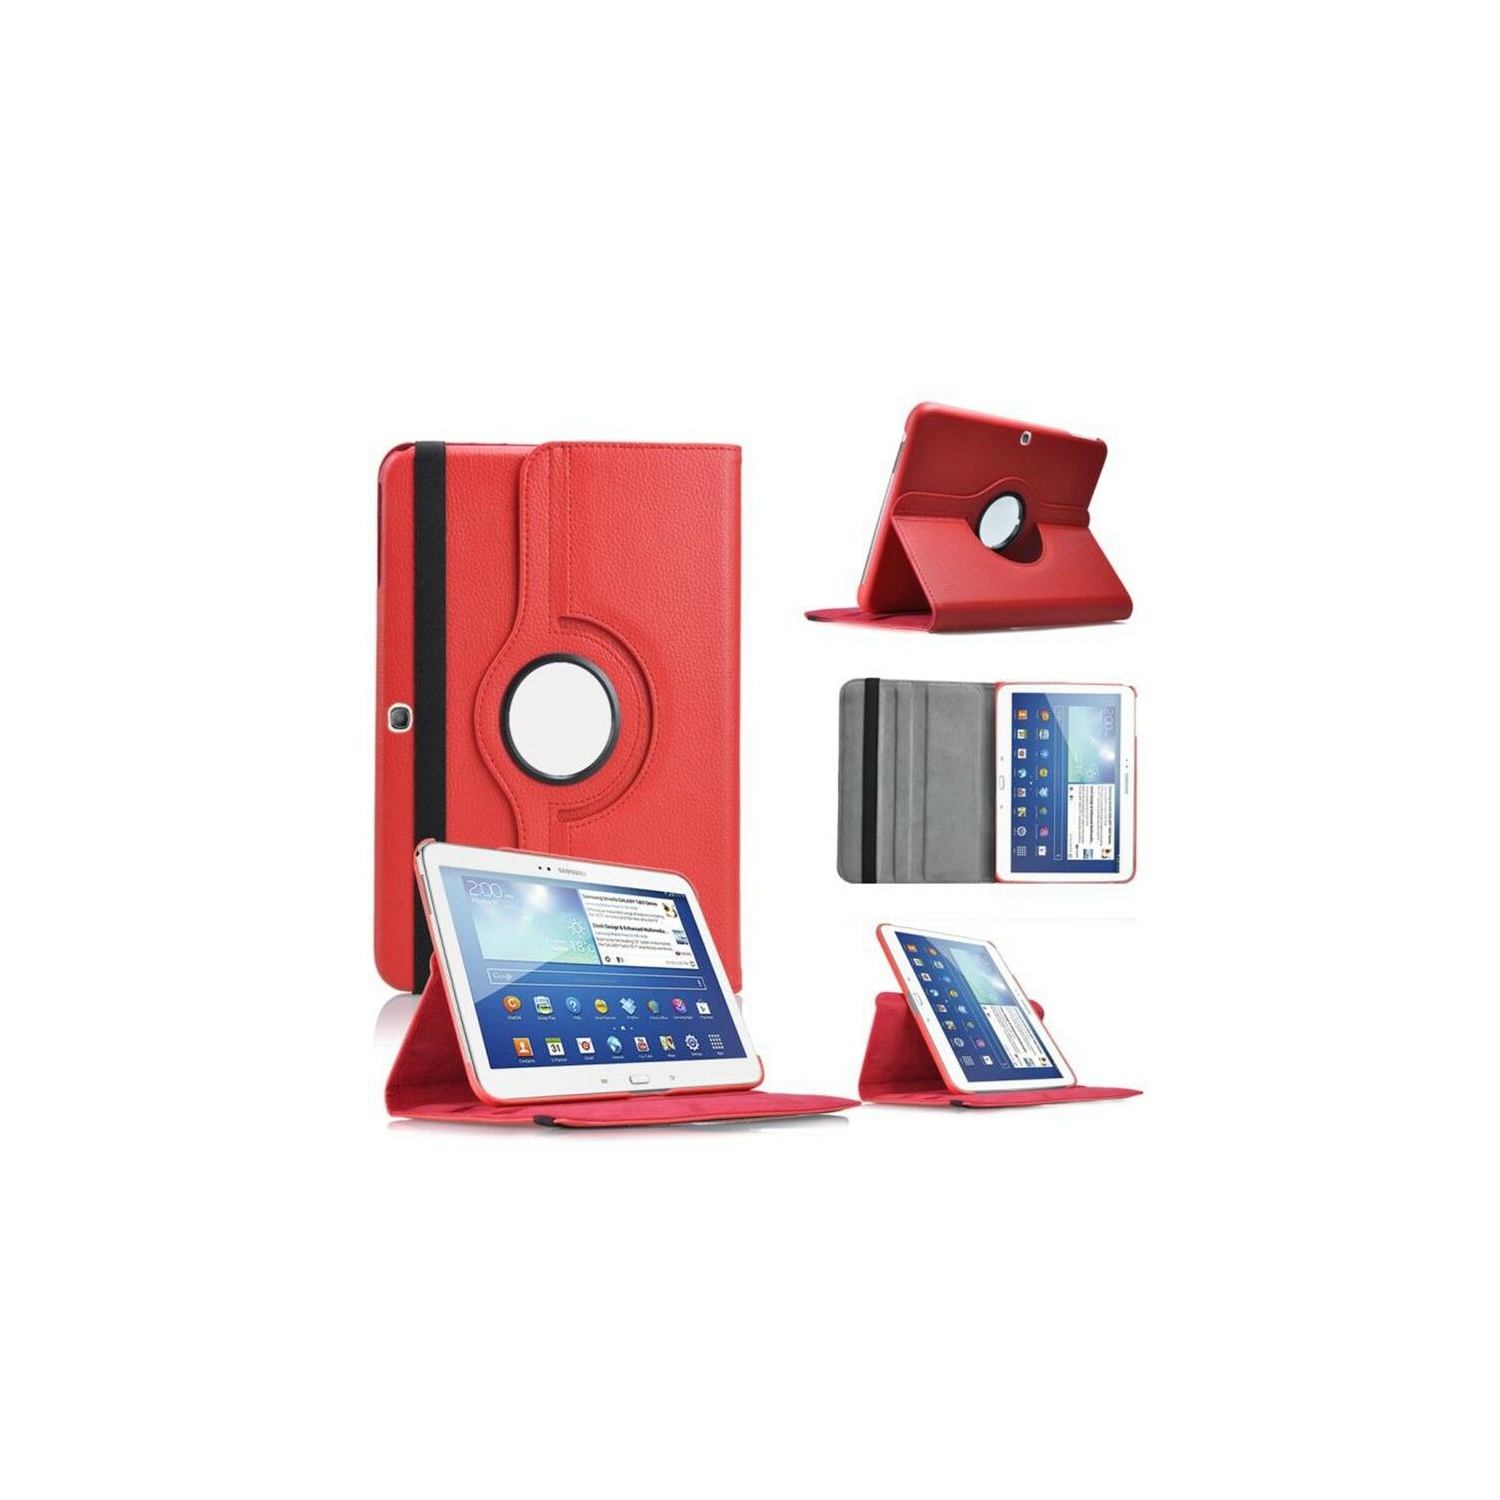 【CSmart】 360 Rotating Leather Tablet Case Smart Stand Cover for Samsung Tab 4 10.1" T530 T531 T535, Red